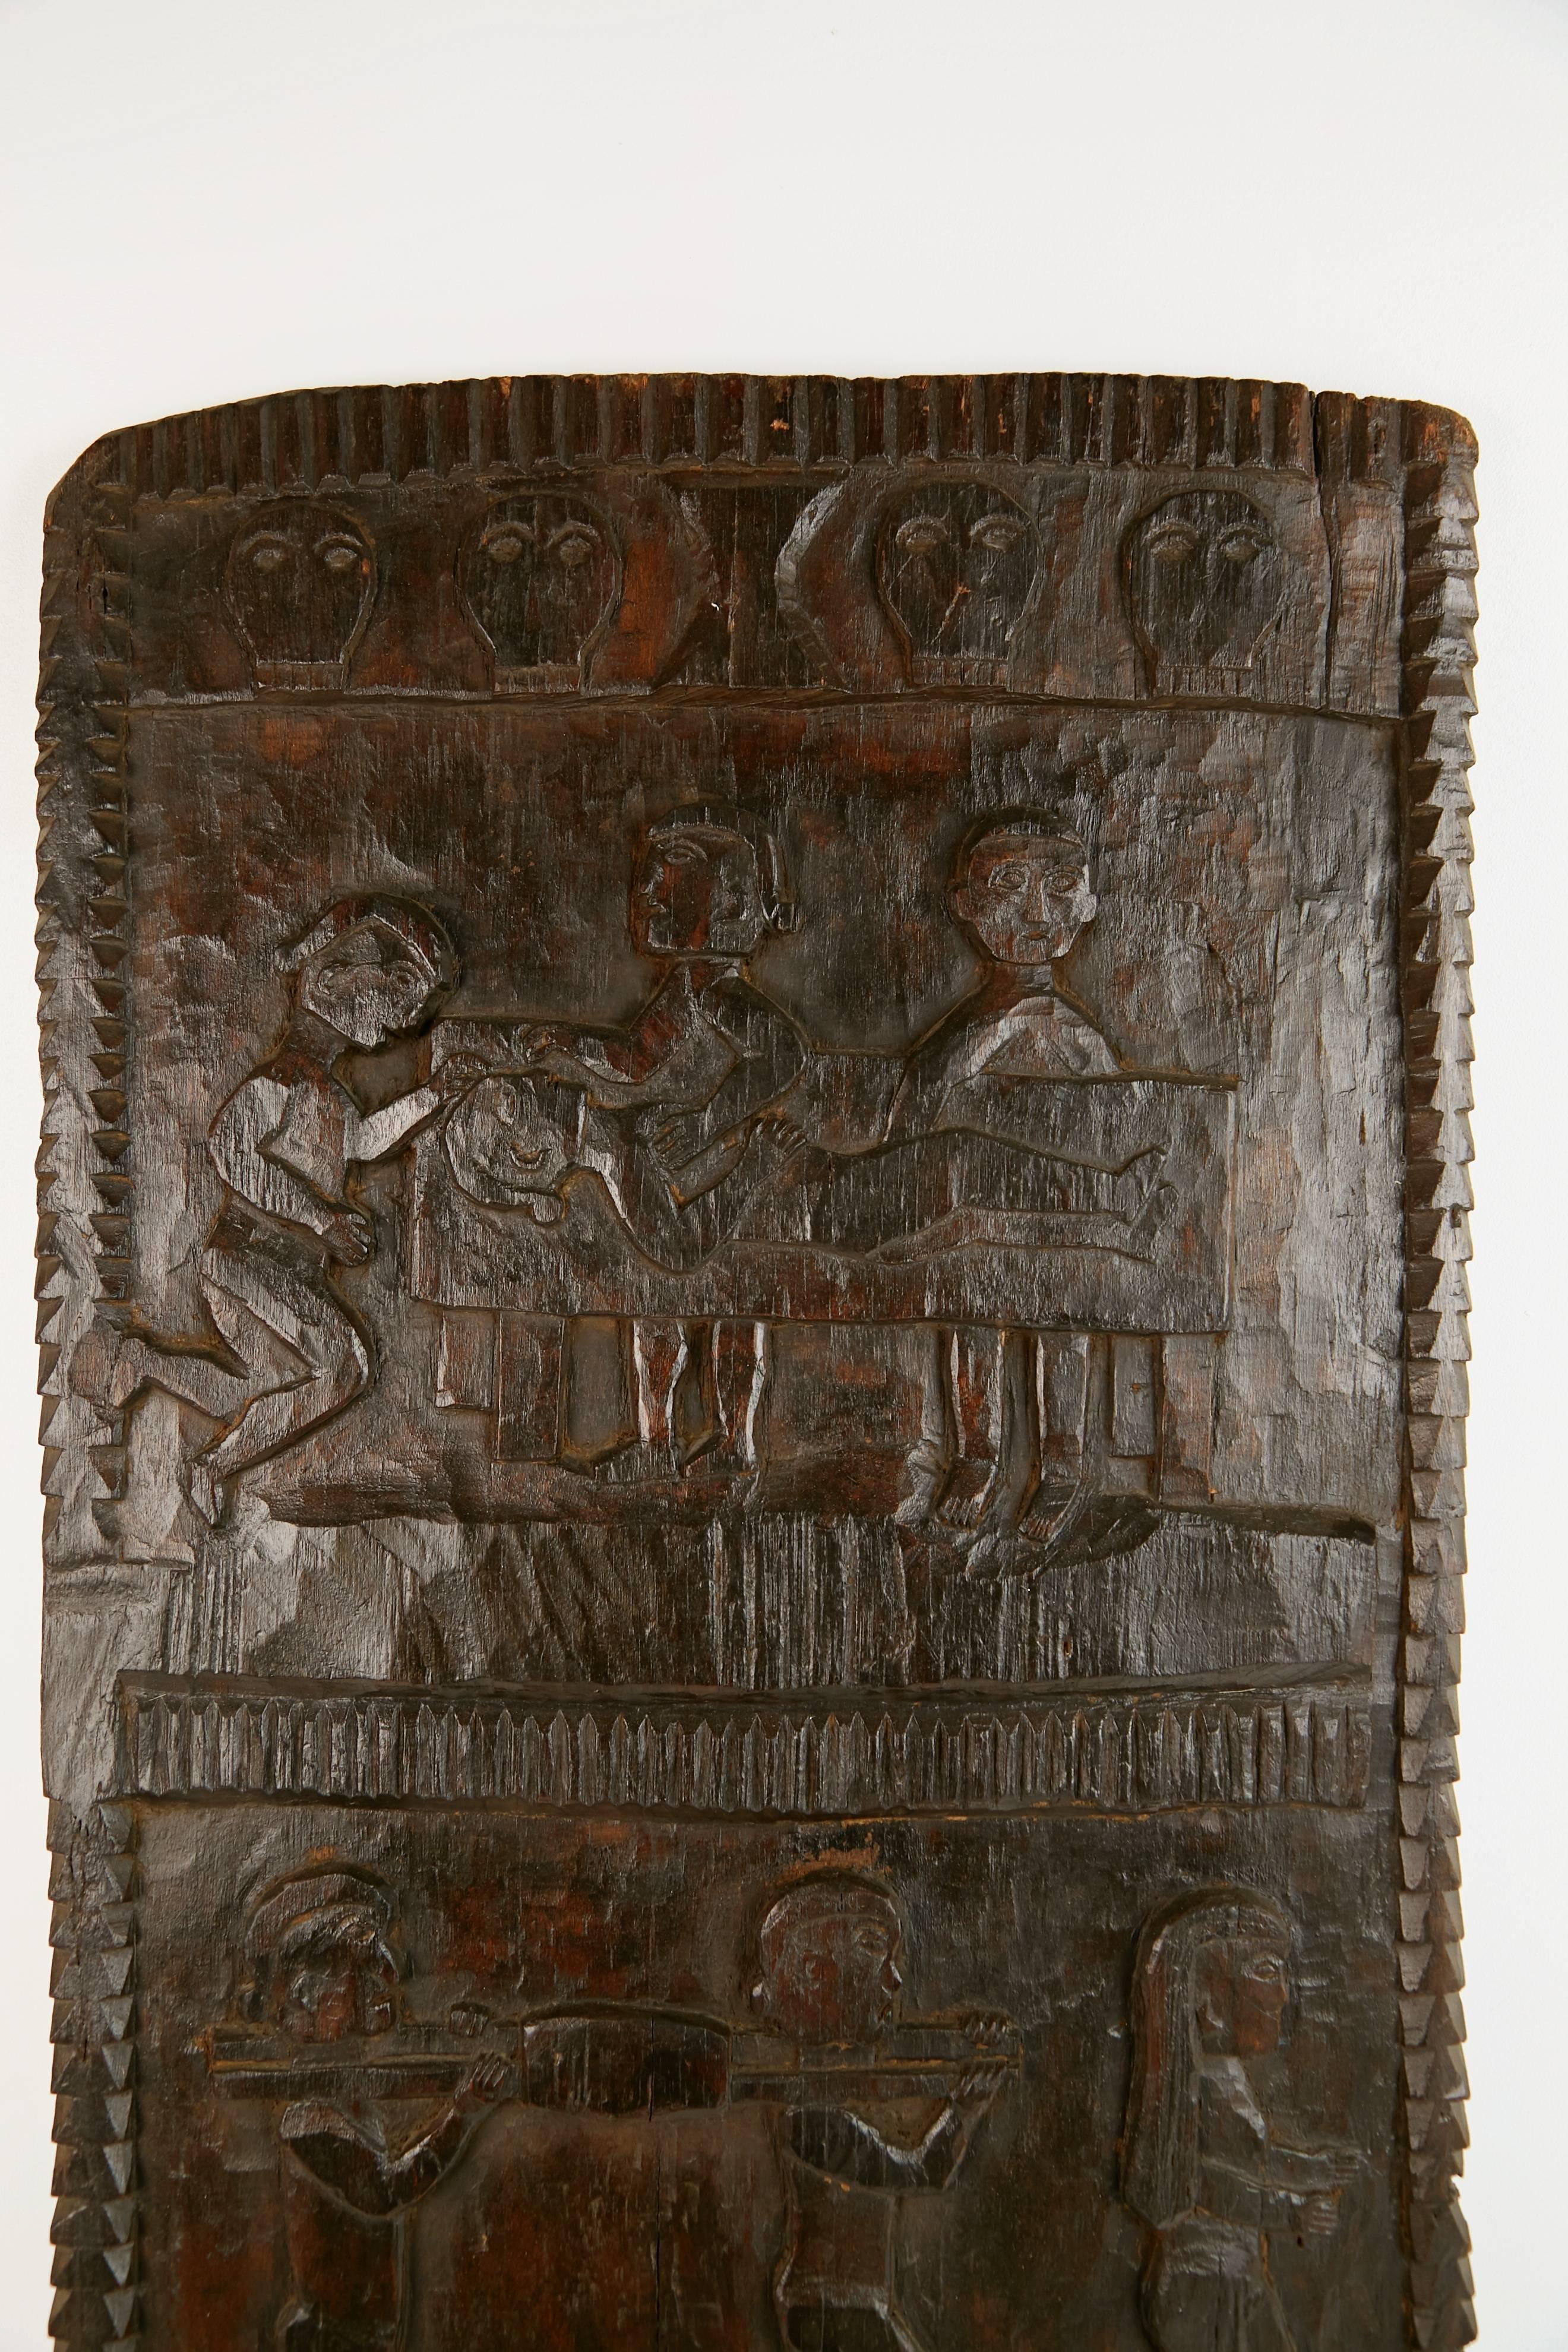 Large decorative African carved granary door featuring figures in various pursuits carved in the traditional manner by tribal artisans. This door has a wire affixed to the back for hanging on the wall. 

This creative piece can be used as wall art